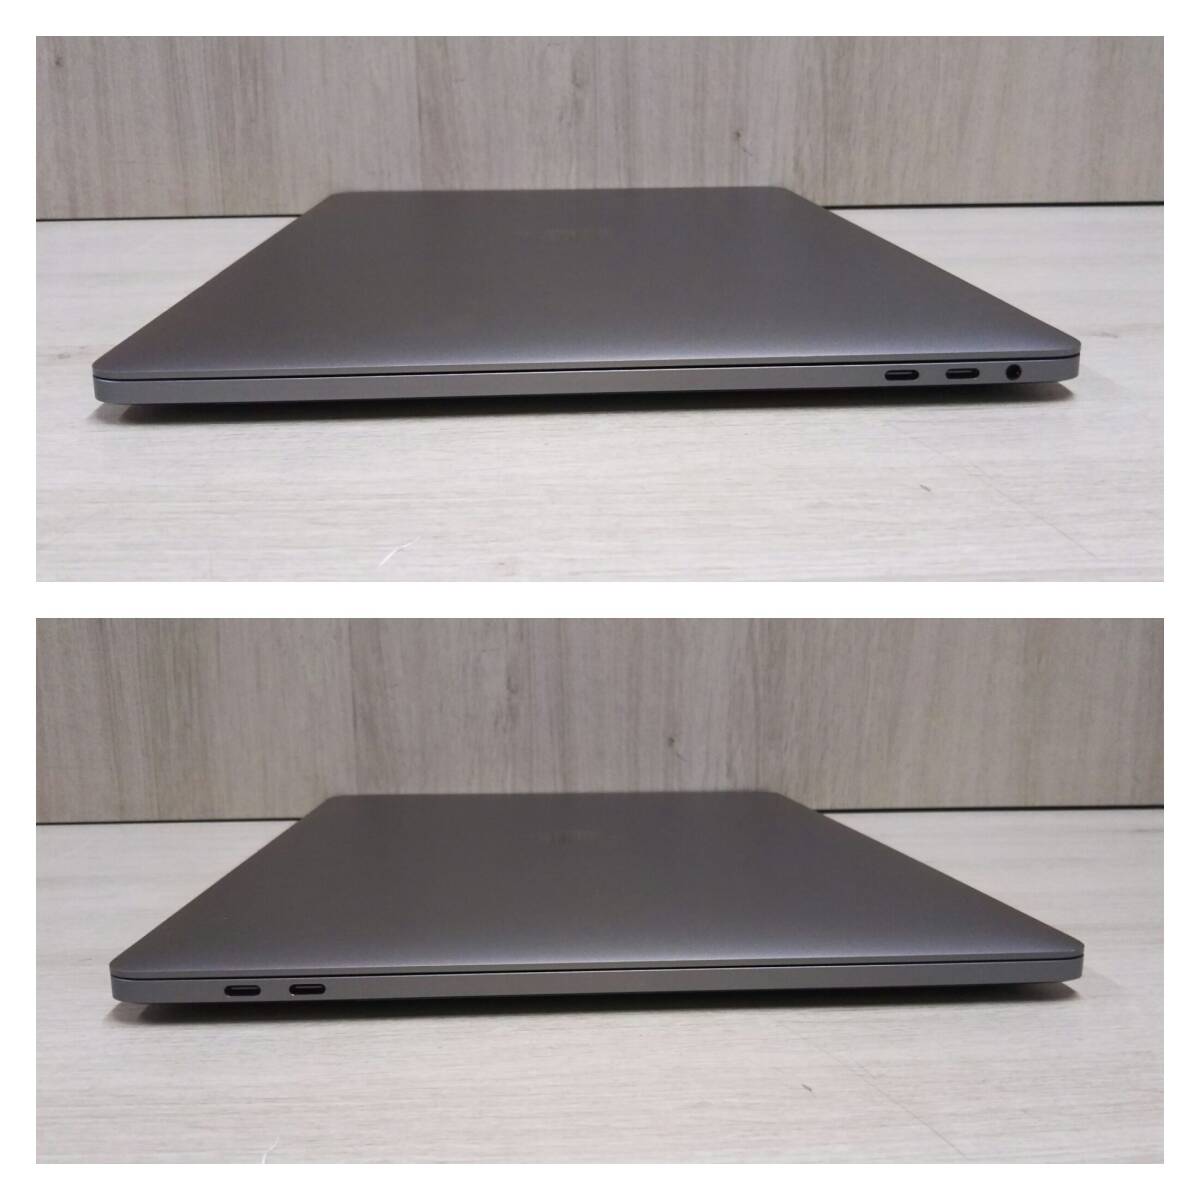  Junk [ operation verification settled ]Apple MacBook Pro MLH32JA/A Space gray Core i7-6700HQ 2.60GHz/256GB/16GB/OS:12.3.1/15 -inch /2016